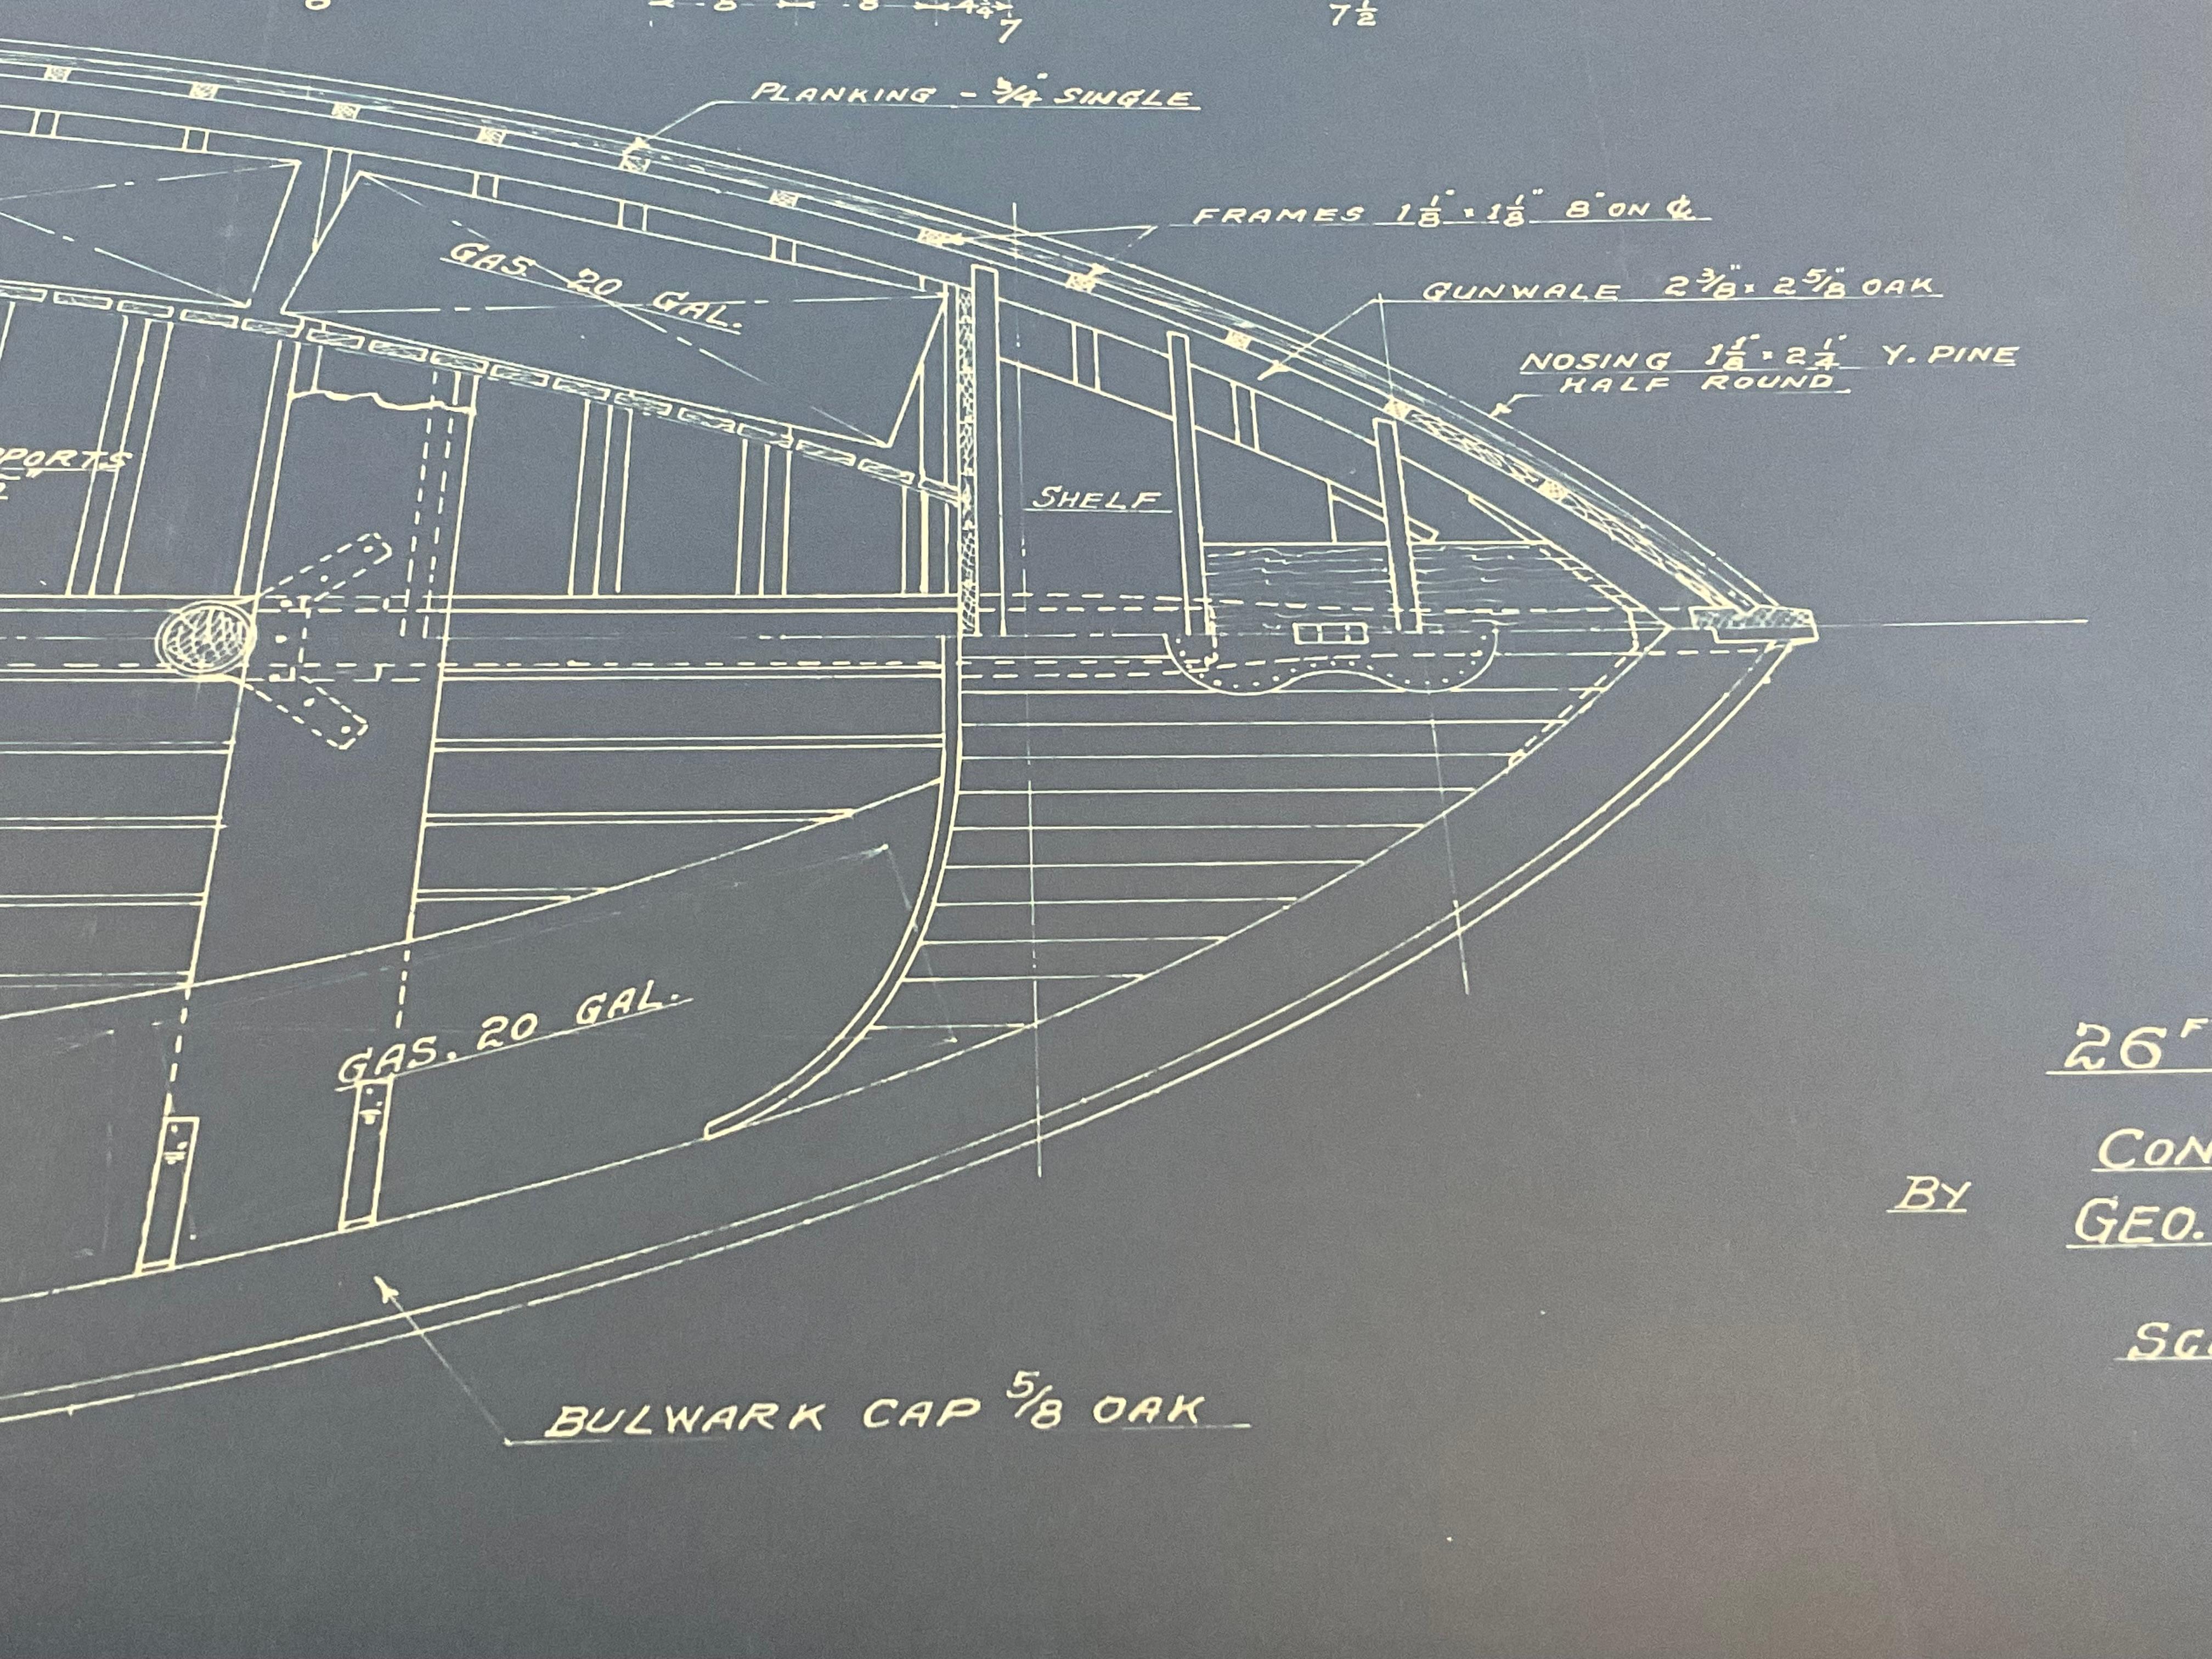 Paper Motor Lifeboat Blueprint by George Lawley Shipyard For Sale